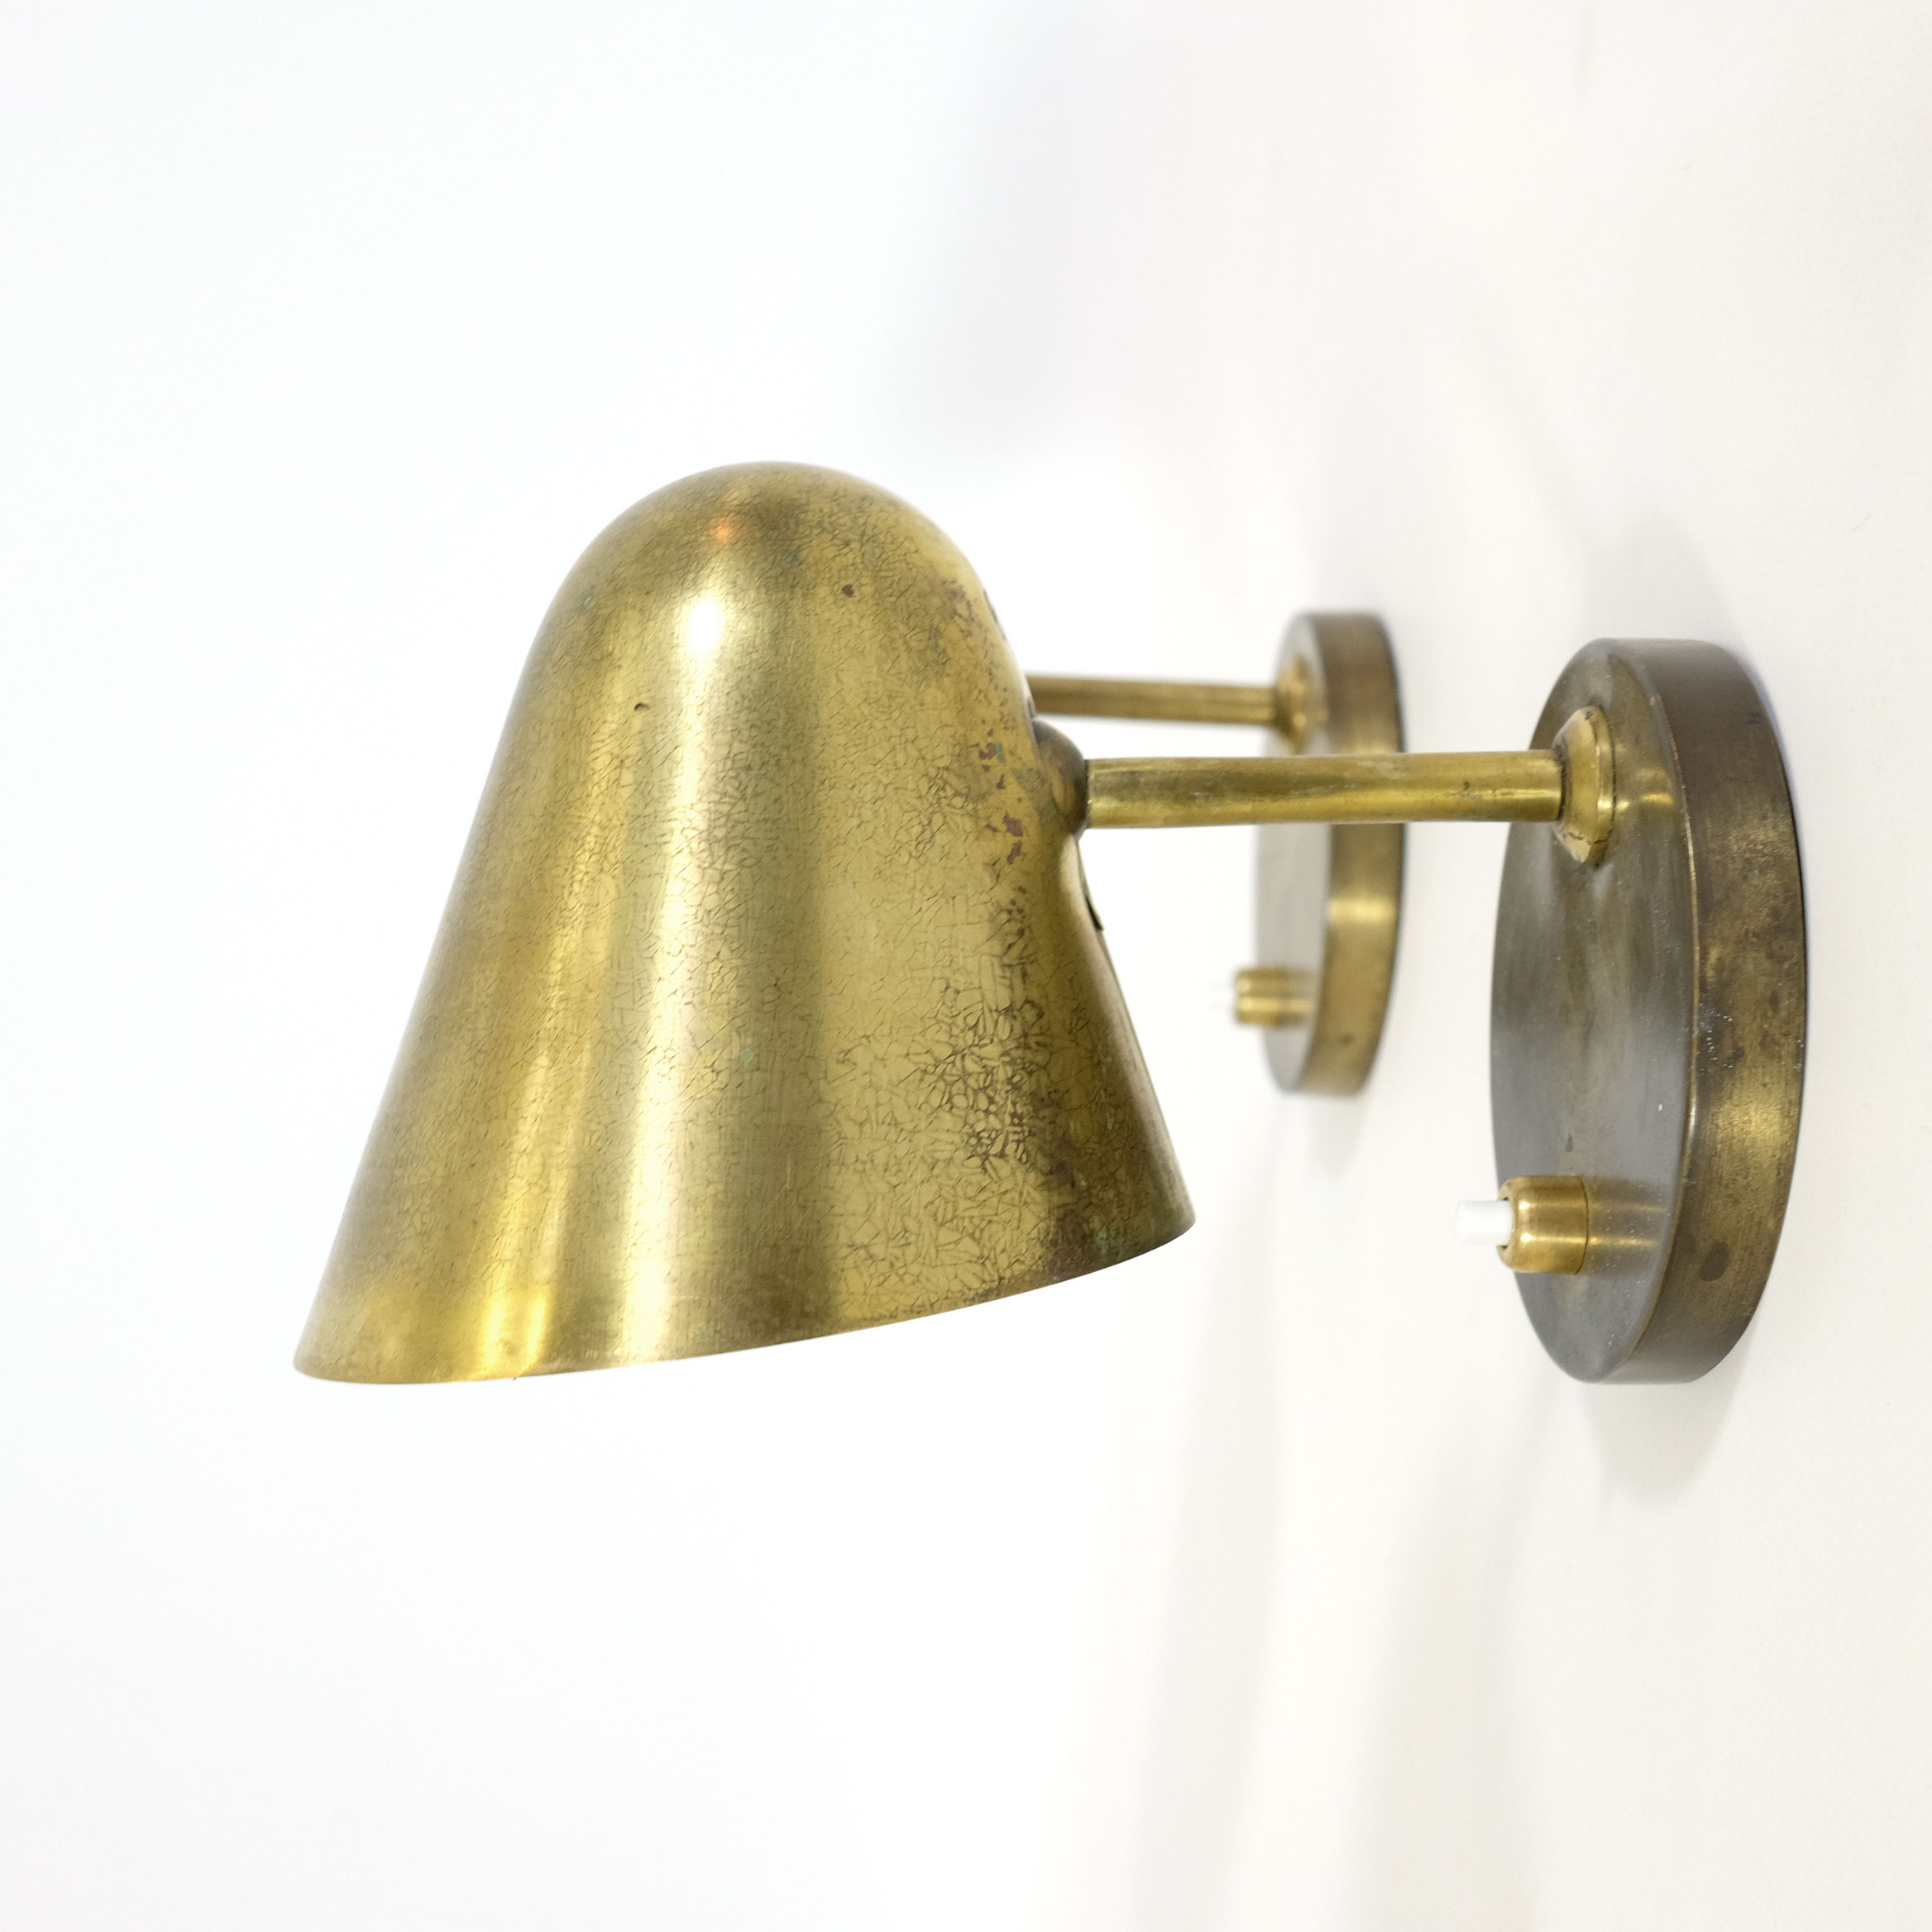 Pair of brass wall mounted lamps from the 1950’s.